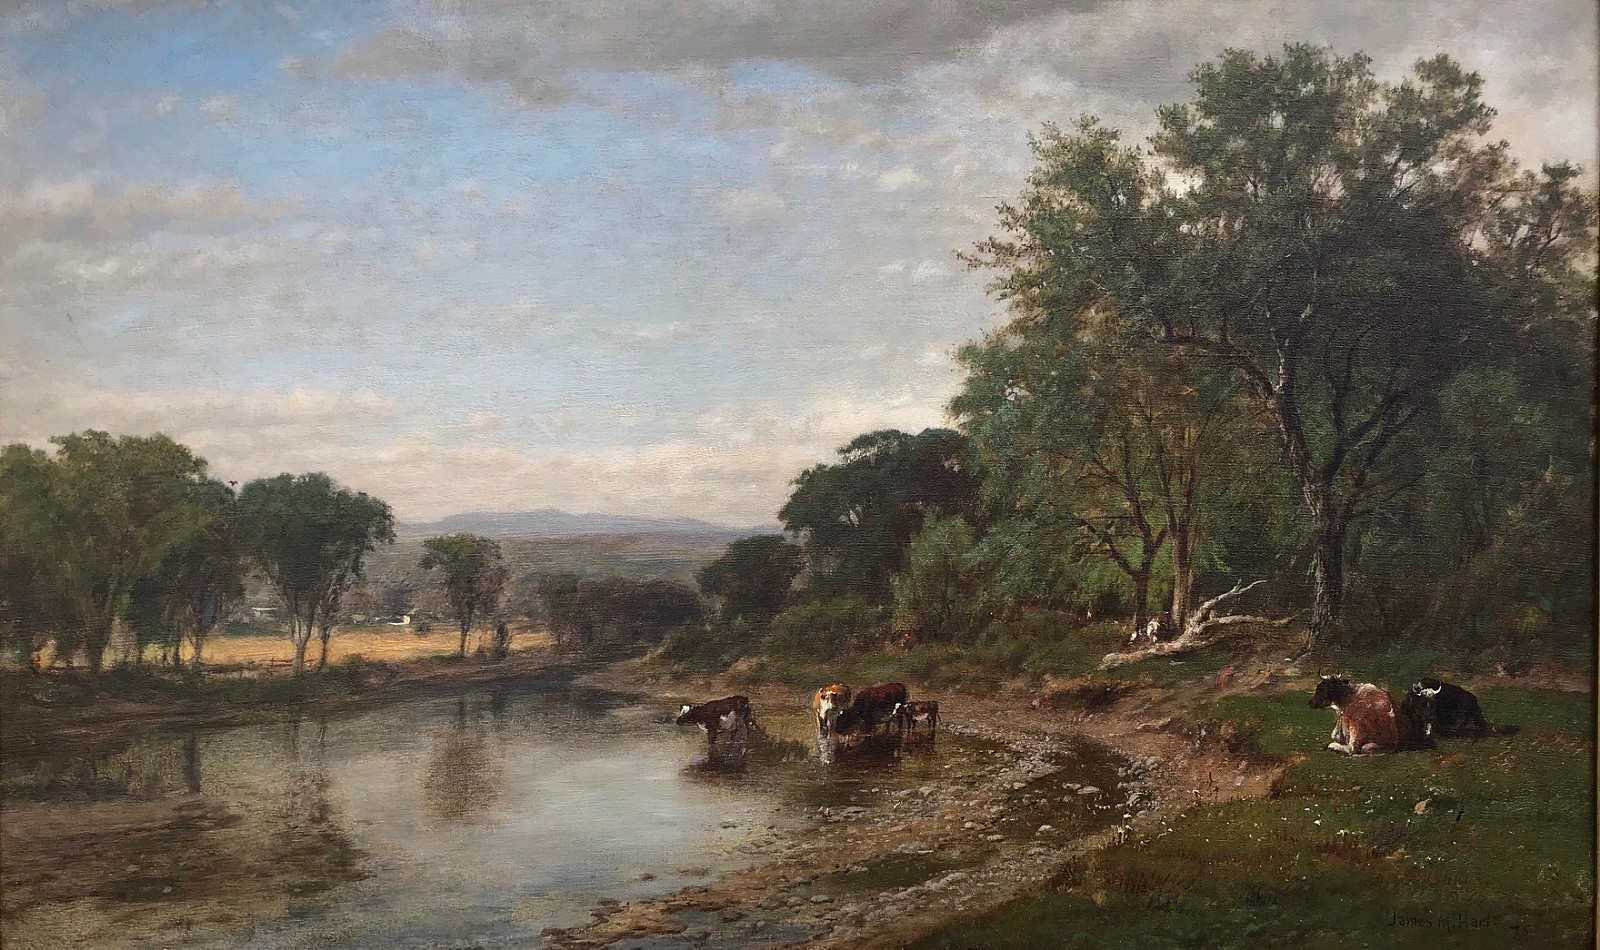 James McDougal Hart, Grazing by the River
oil on canvas, 16" x 26"
signed James M Hart and dated '75, lower right
MP 1019.01
Sold